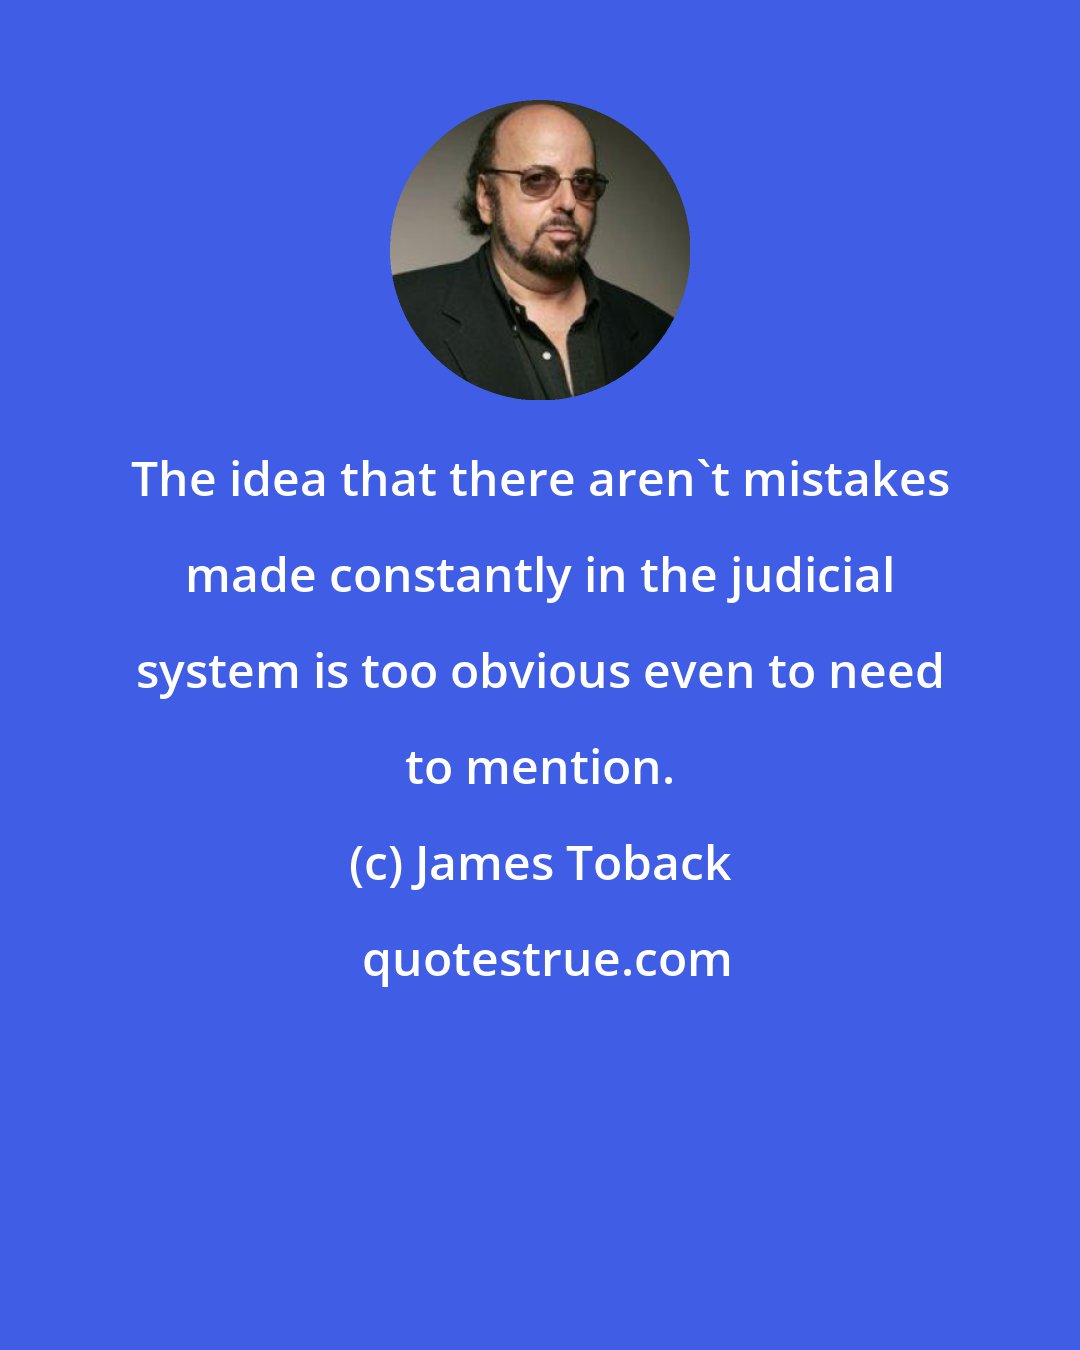 James Toback: The idea that there aren't mistakes made constantly in the judicial system is too obvious even to need to mention.